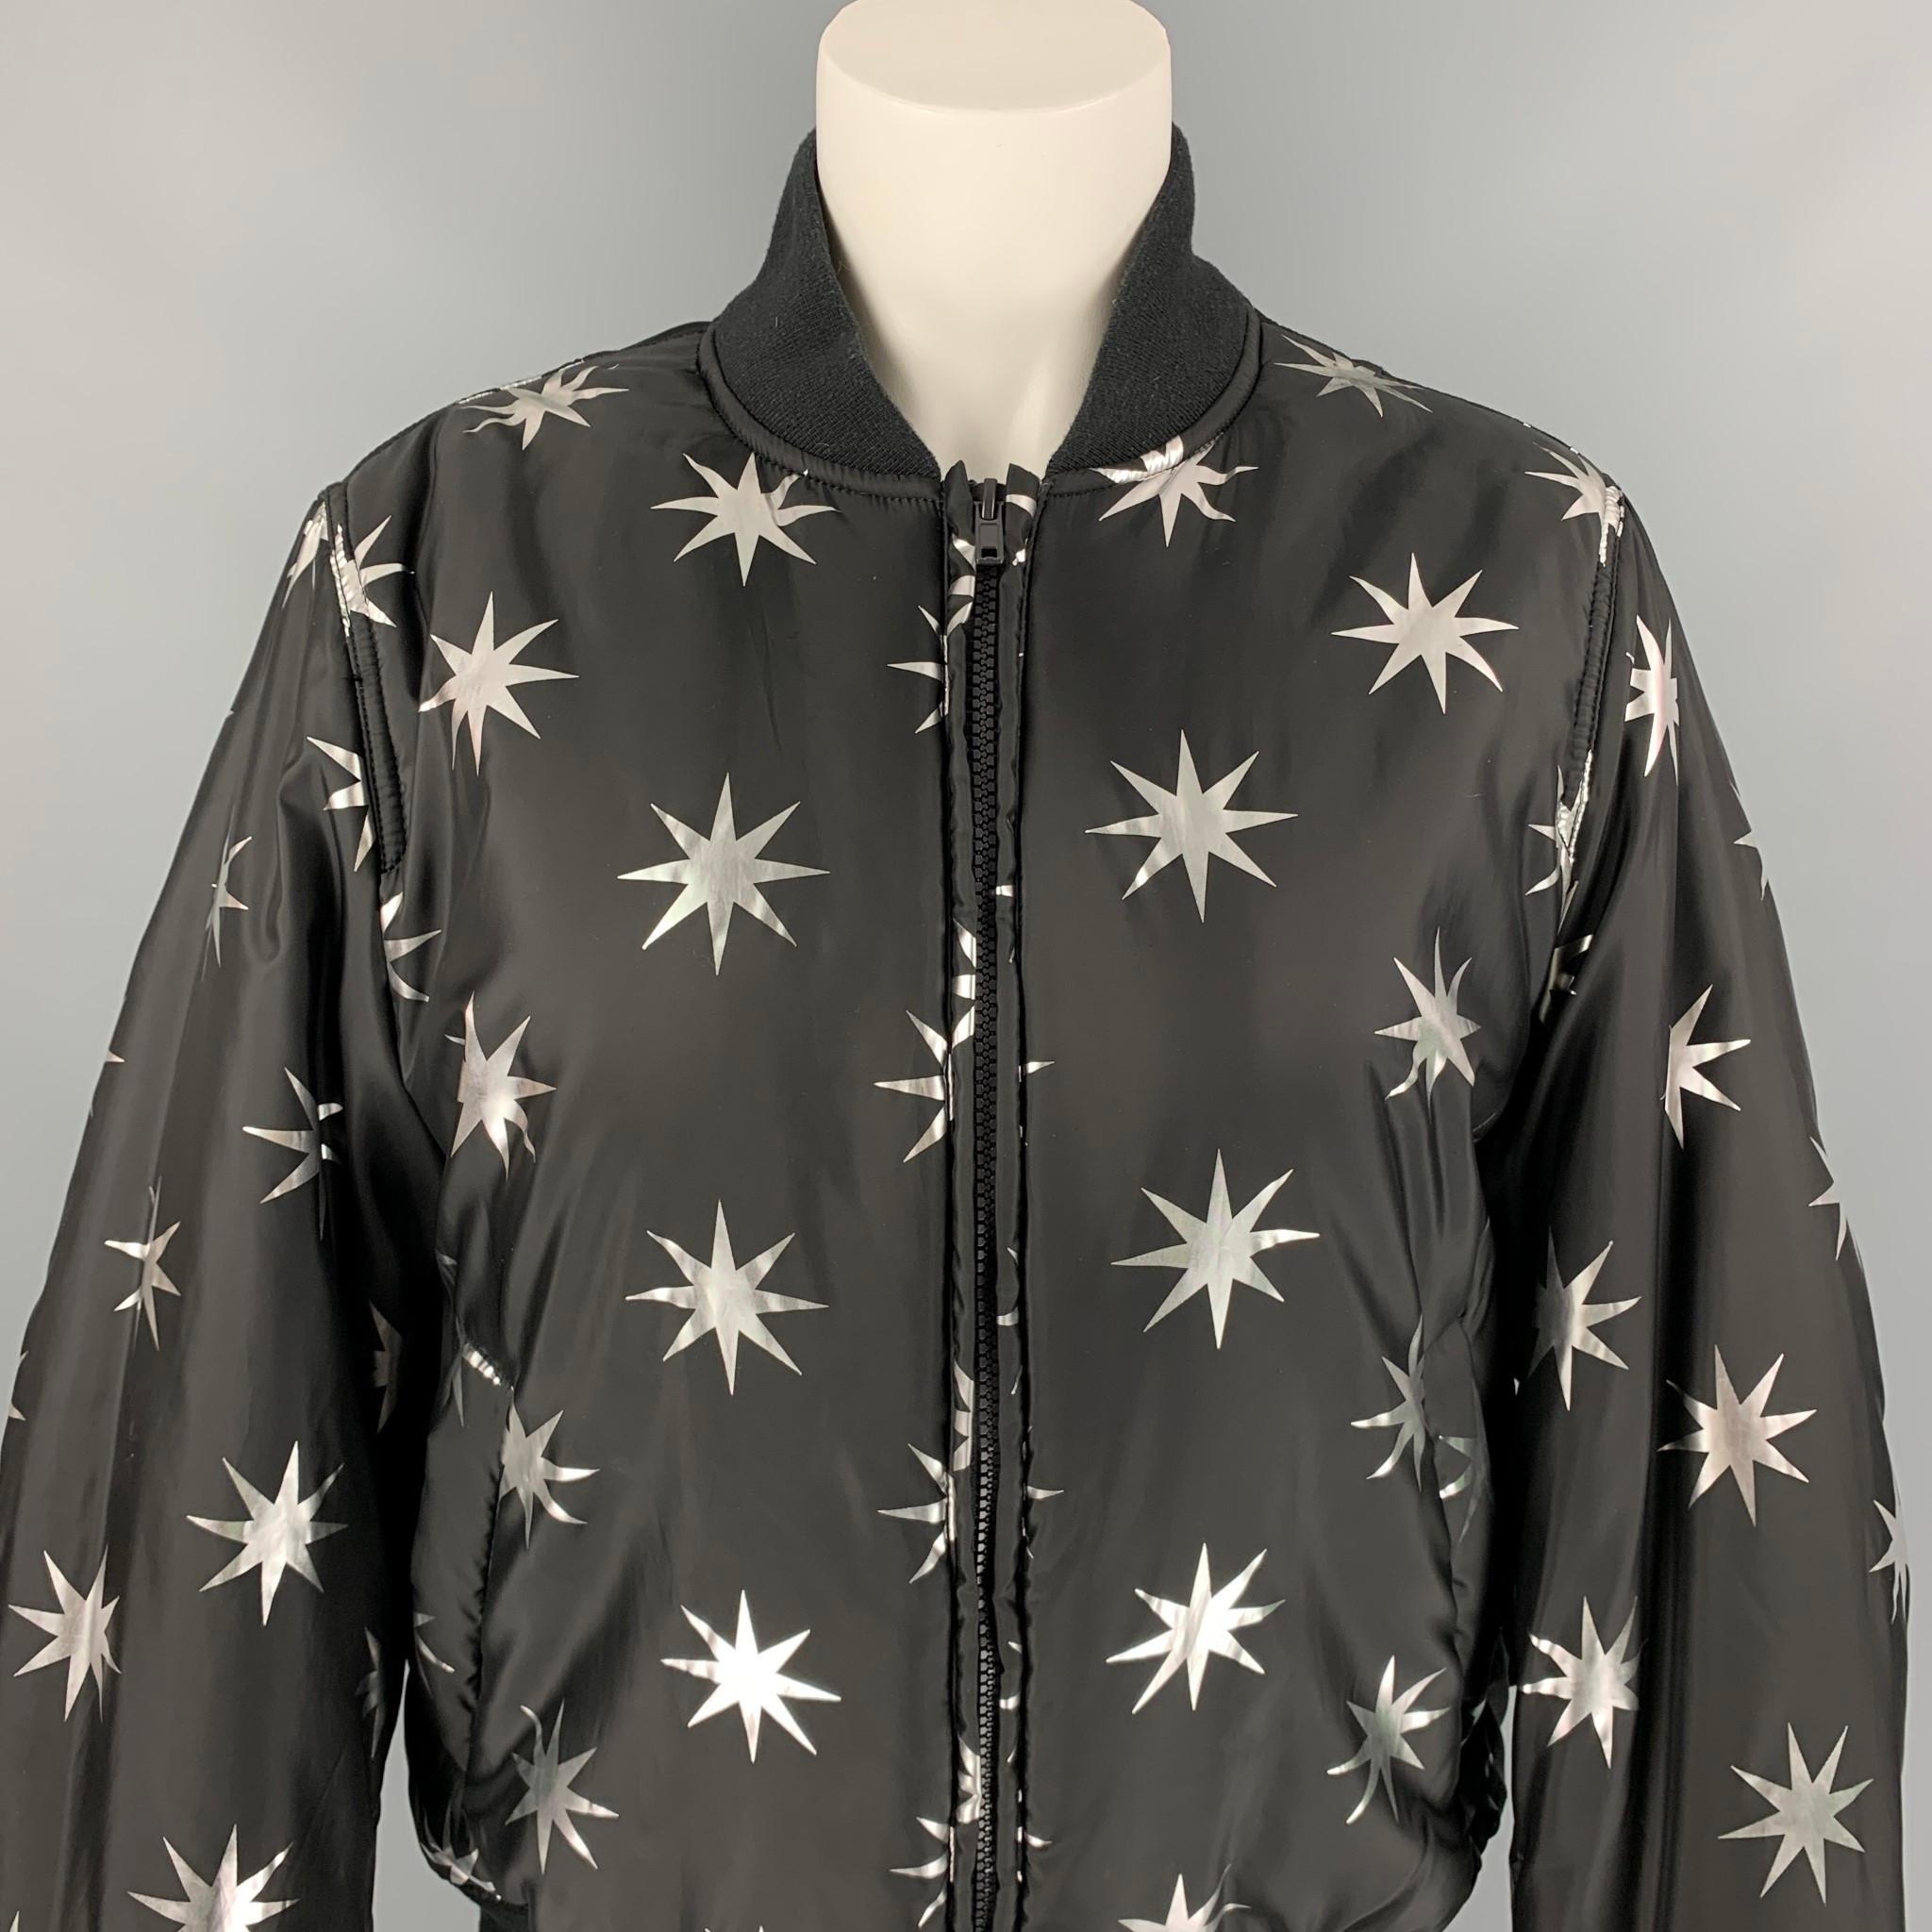 LOVE MOSCHINO jacket comes in a black & silver star print polyester featuring a bomber style, ribbed hem, slit pockets, and a full zip closure. 

Very Good Pre-Owned Condition.
Marked: D 38 / GB 10 / F 38 / USA 6 / I 42

Measurements:

Shoulder: 17